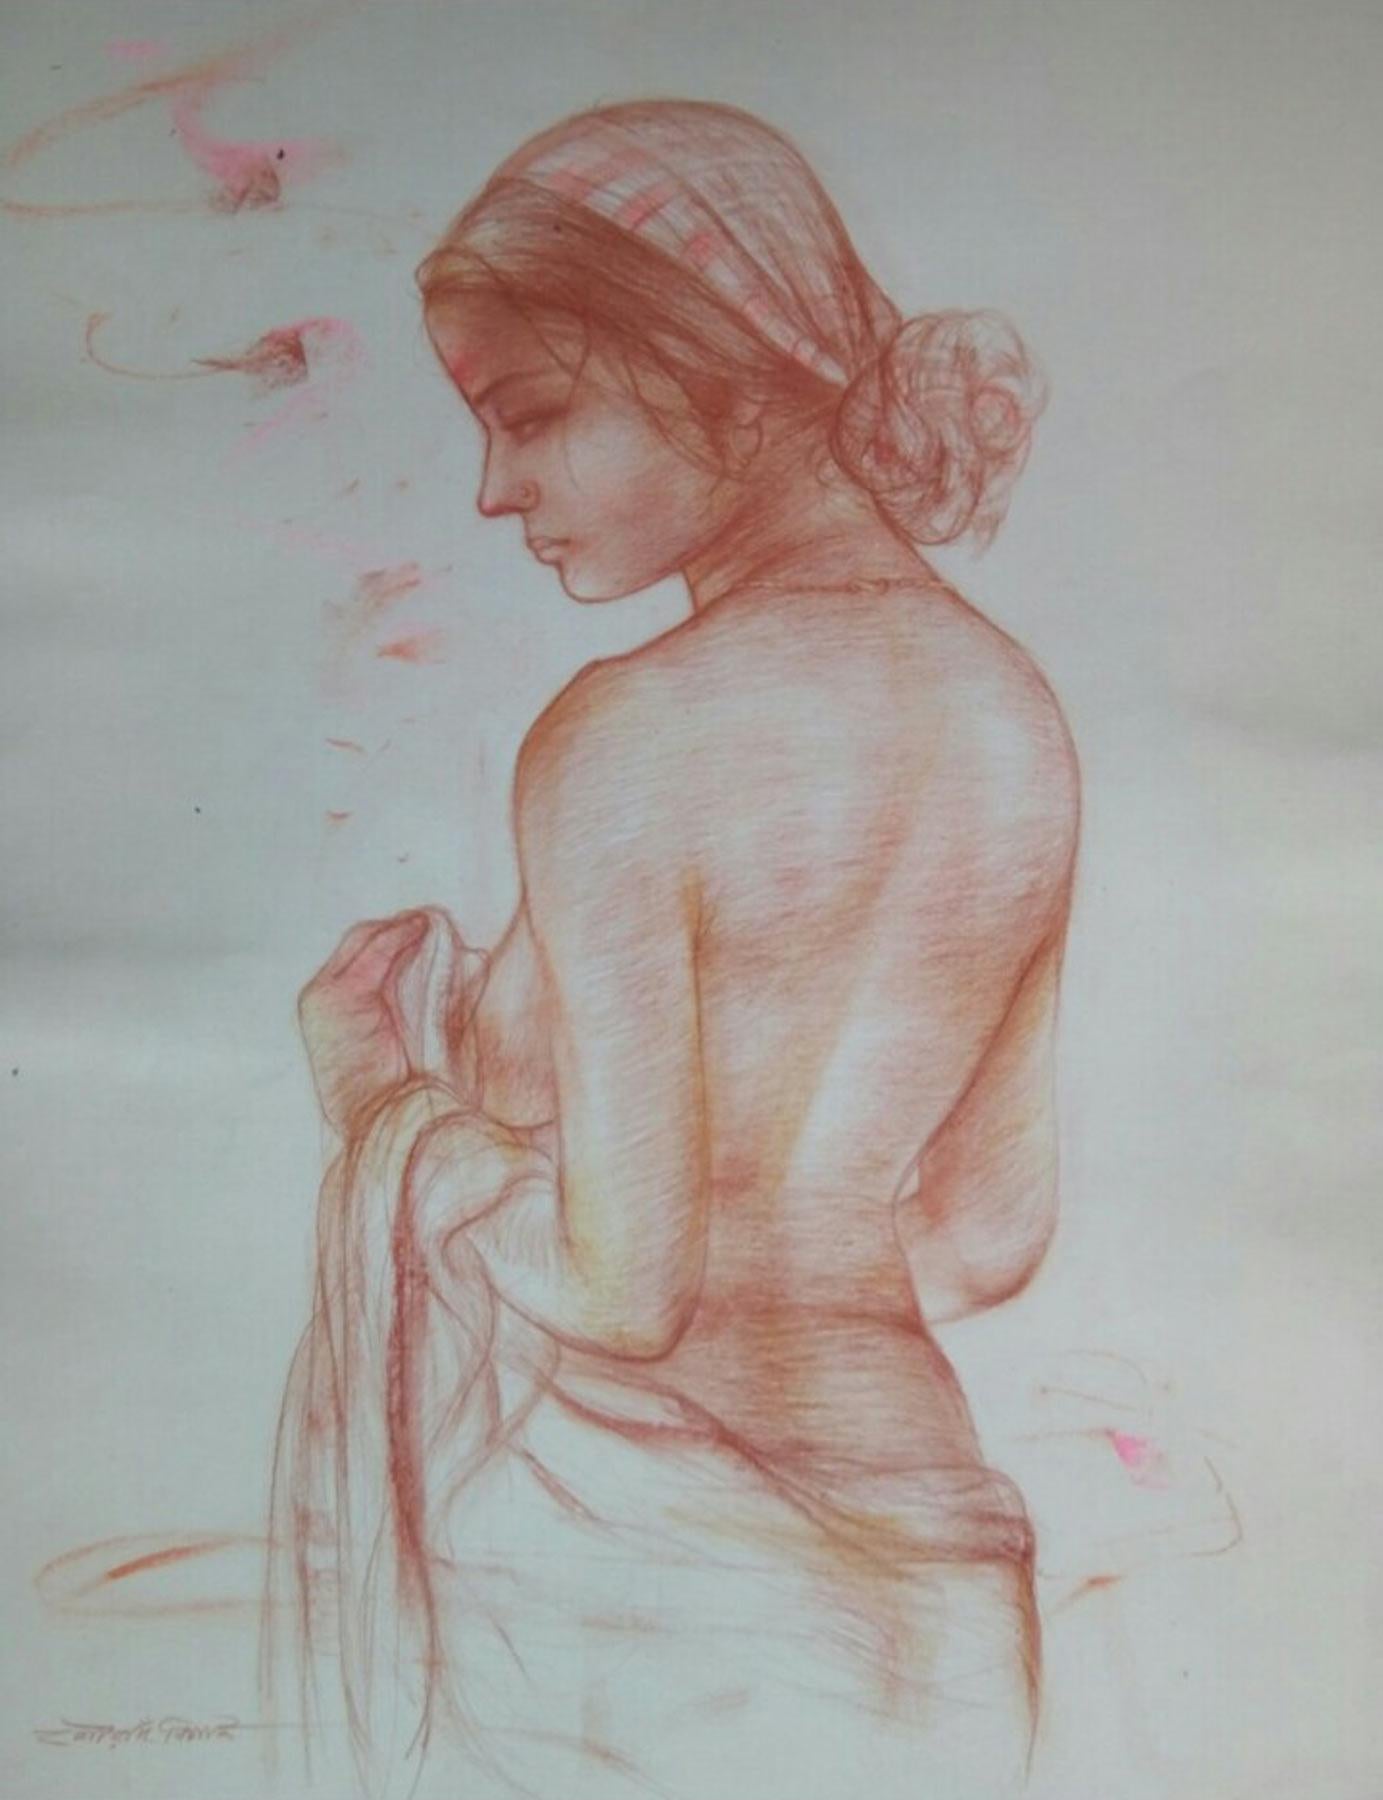 Nude, Bengali Women, Bathing, Mixed Media on paper, Pink, Red, Brown "In Stock"